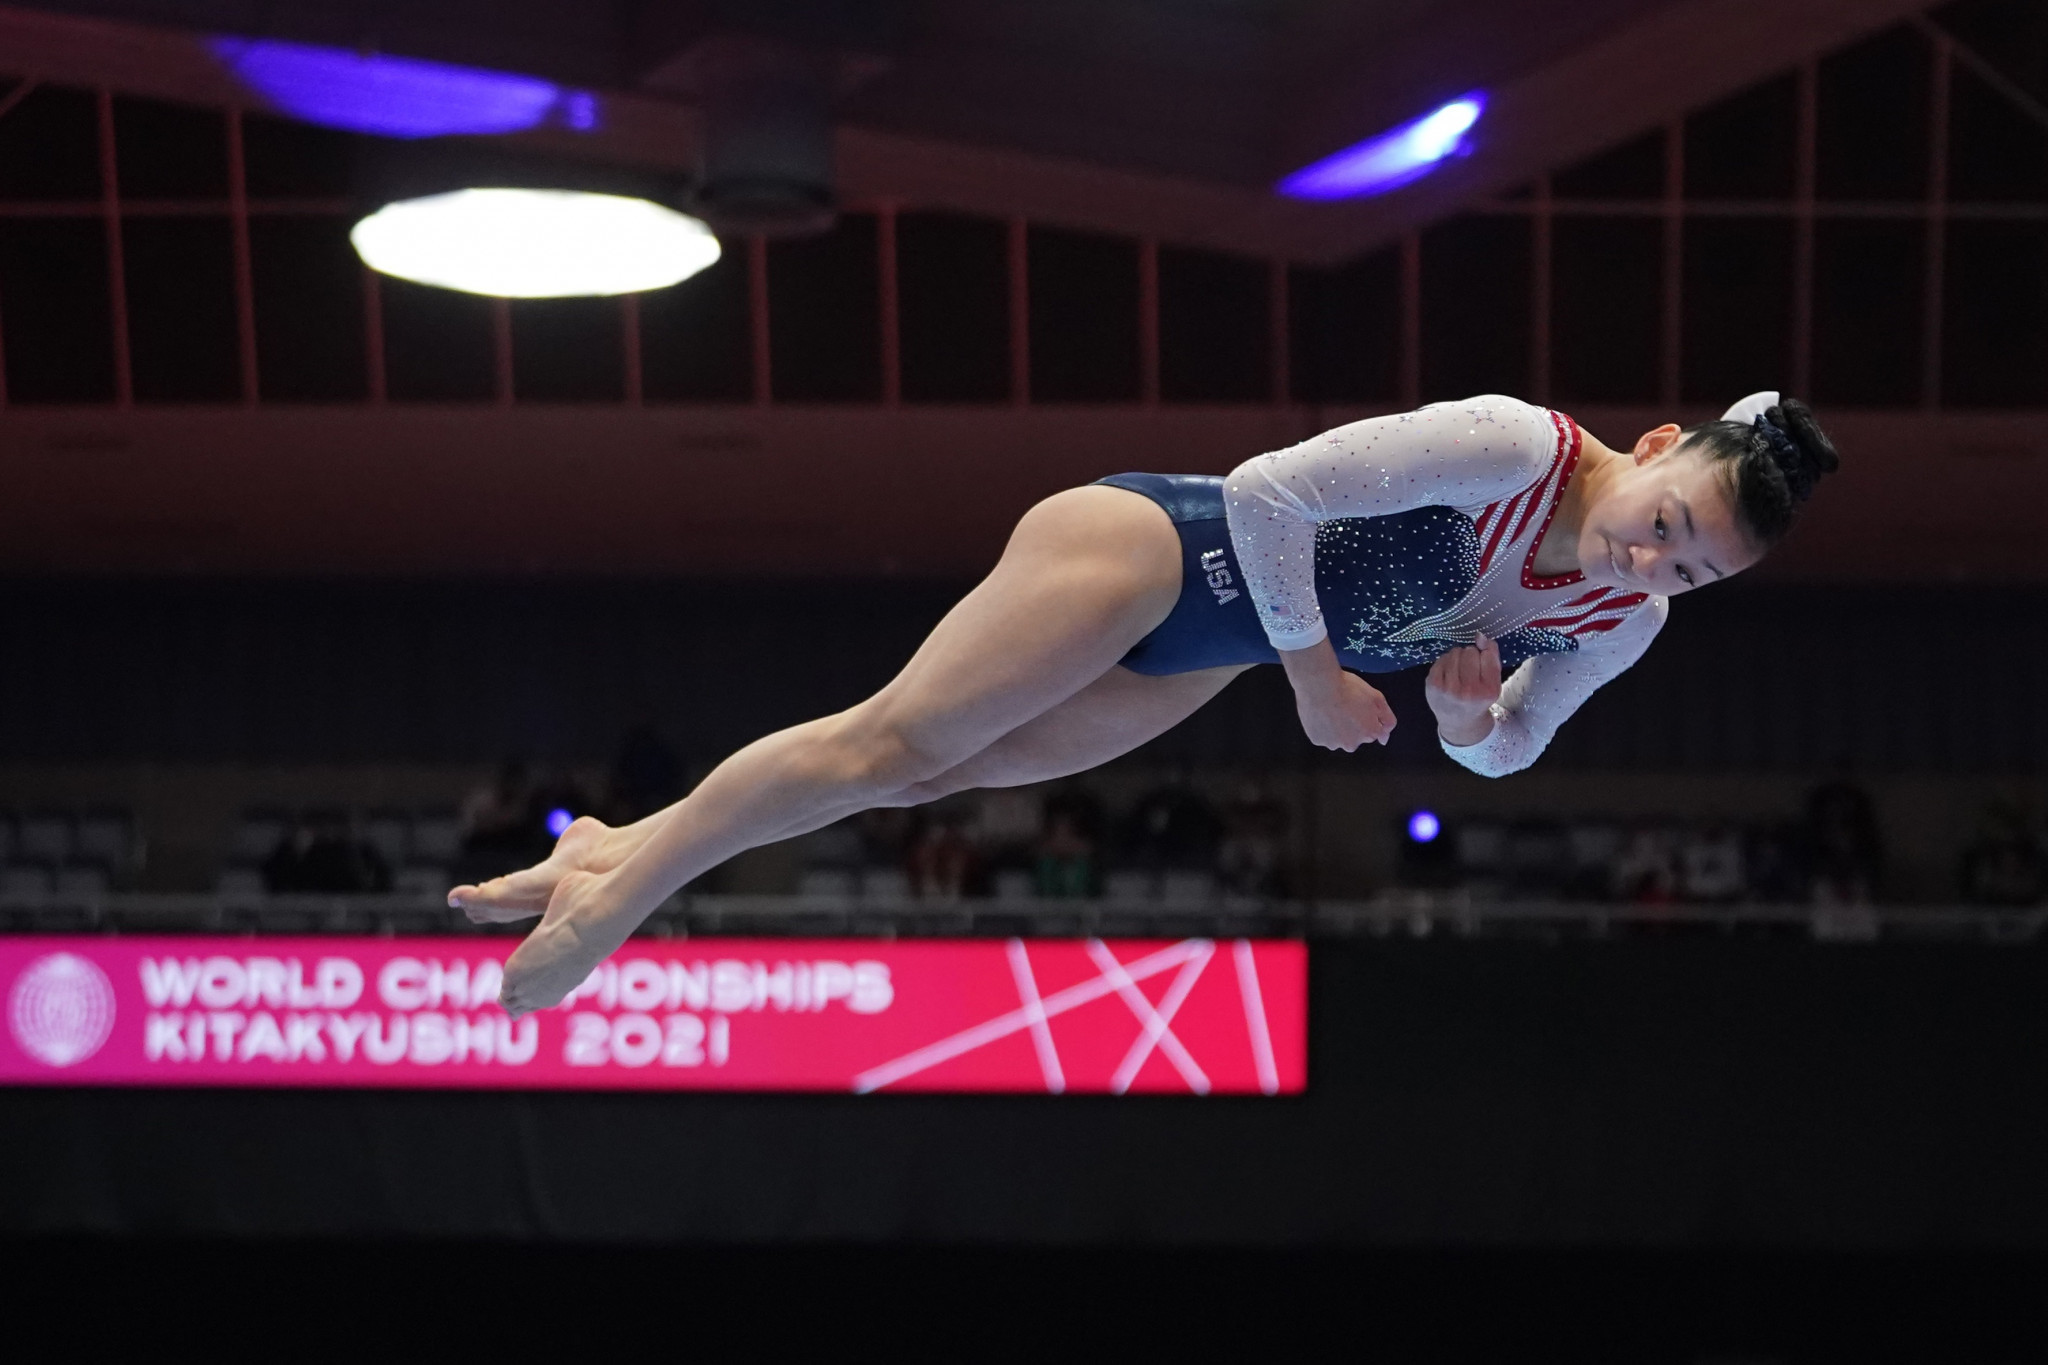 Leanne Wong was one of two Americans on the podium as she looked to fill the void left by the absent Simone Biles ©Getty Images